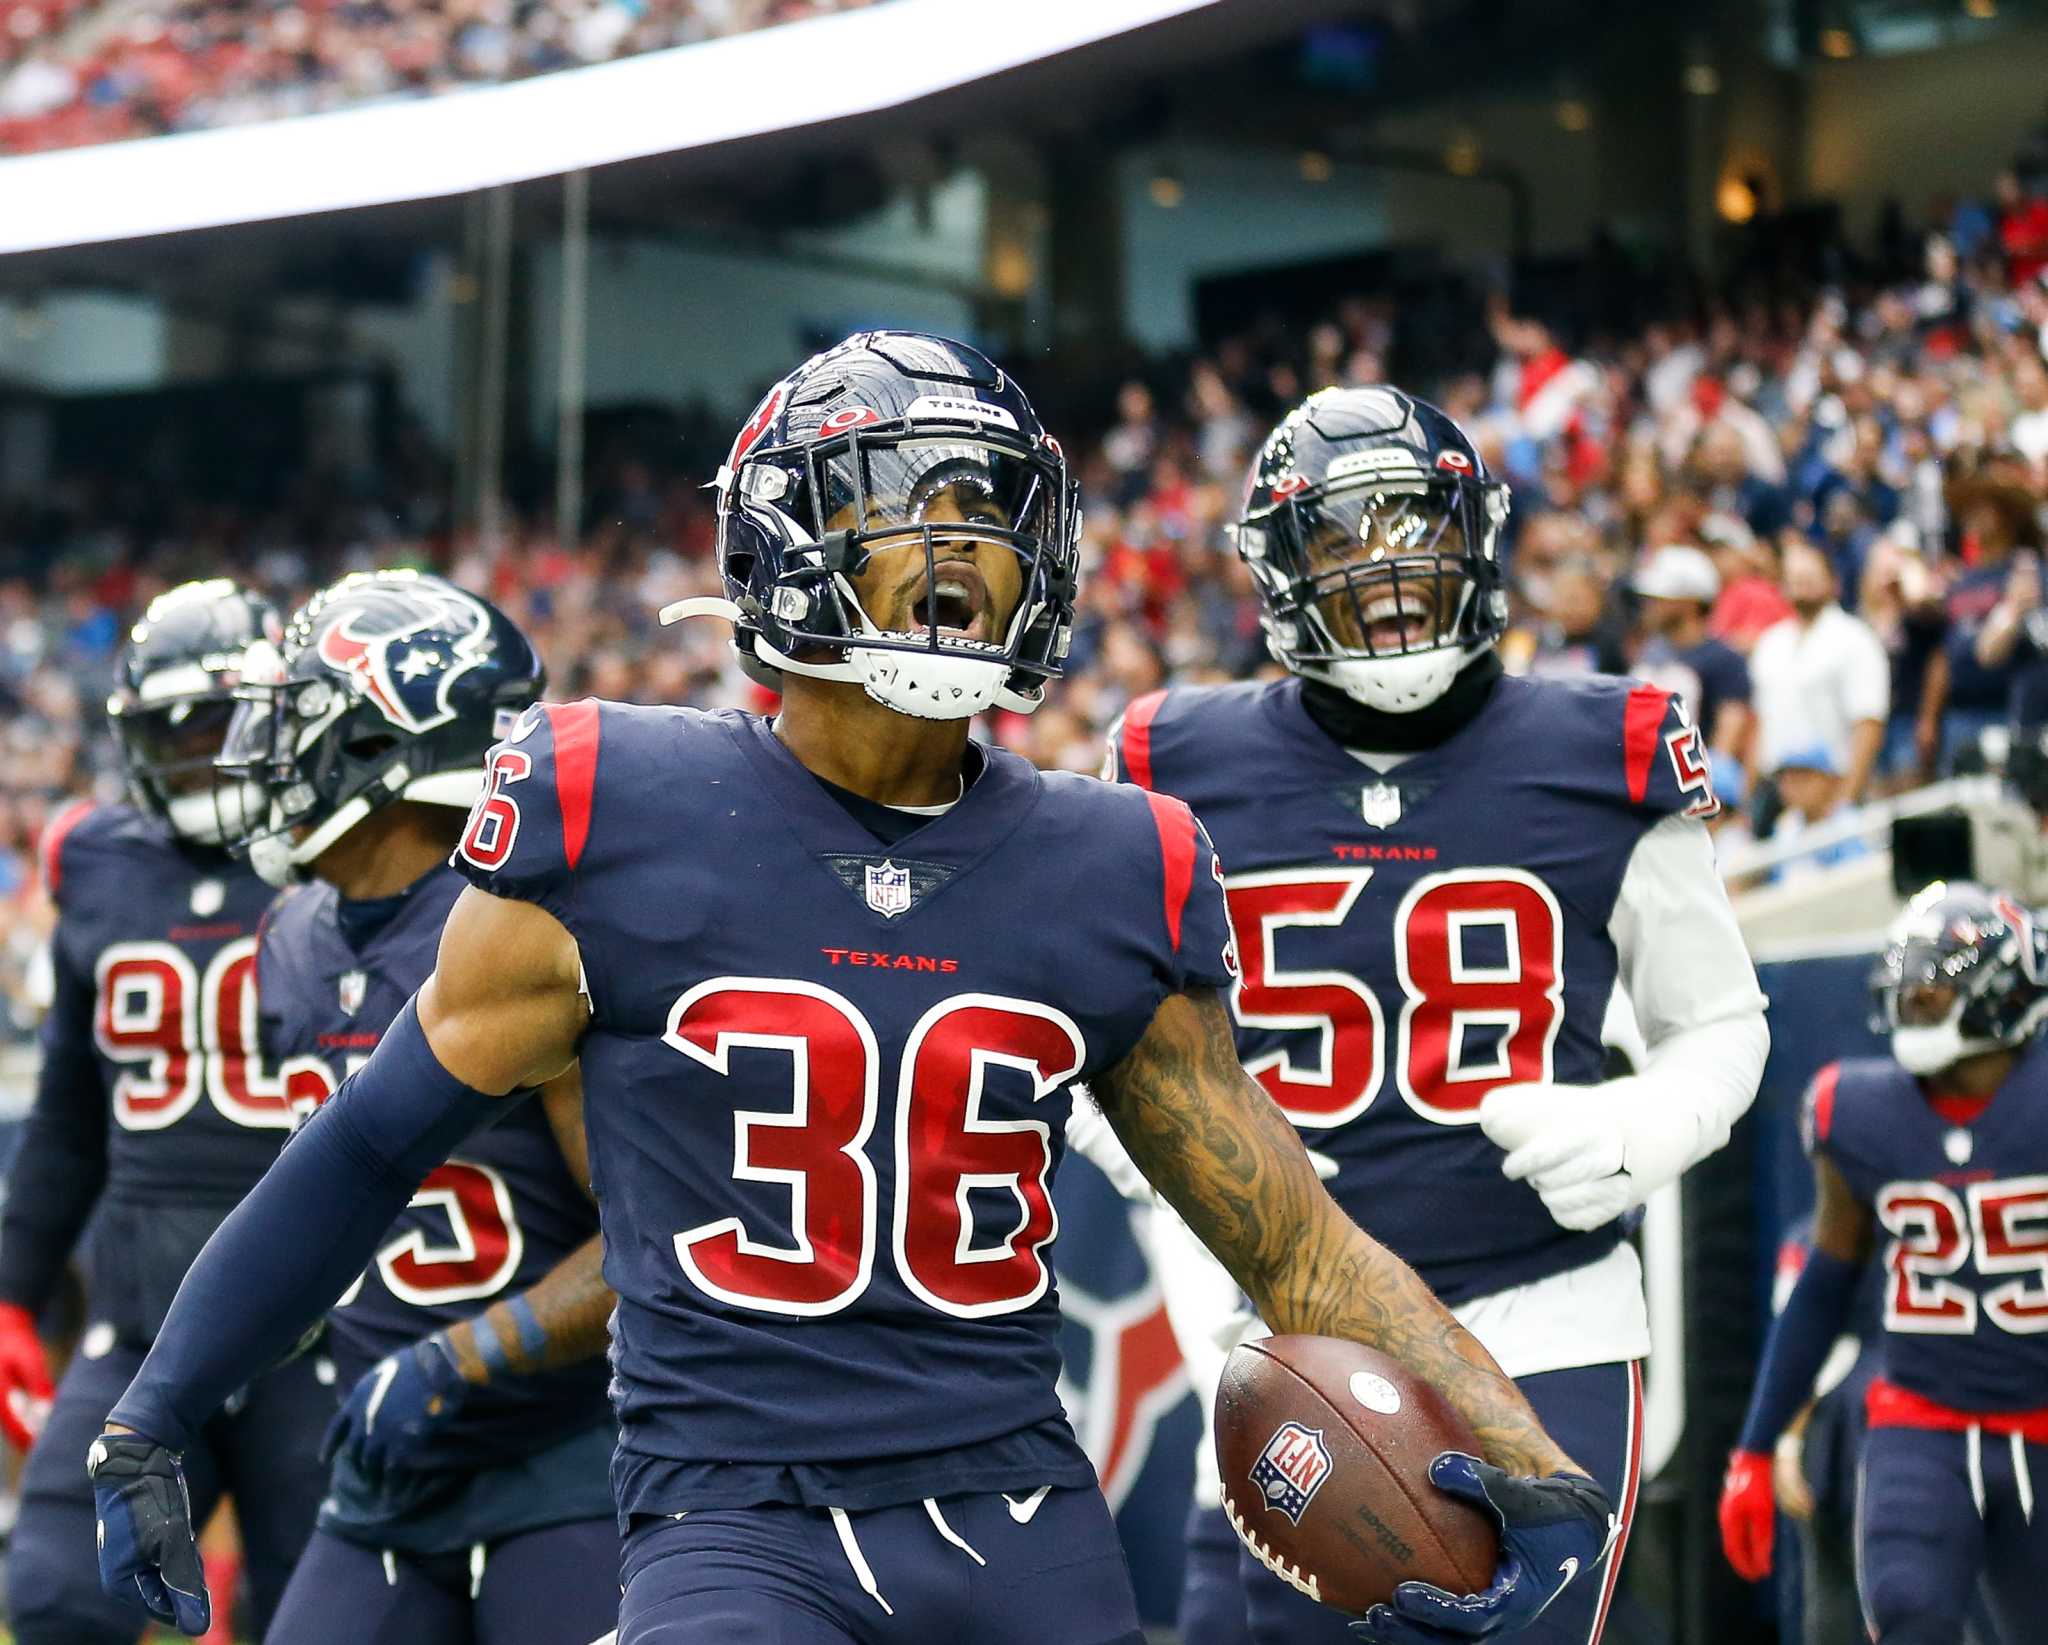 Los Angeles Chargers at Houston Texans on December 26, 2021